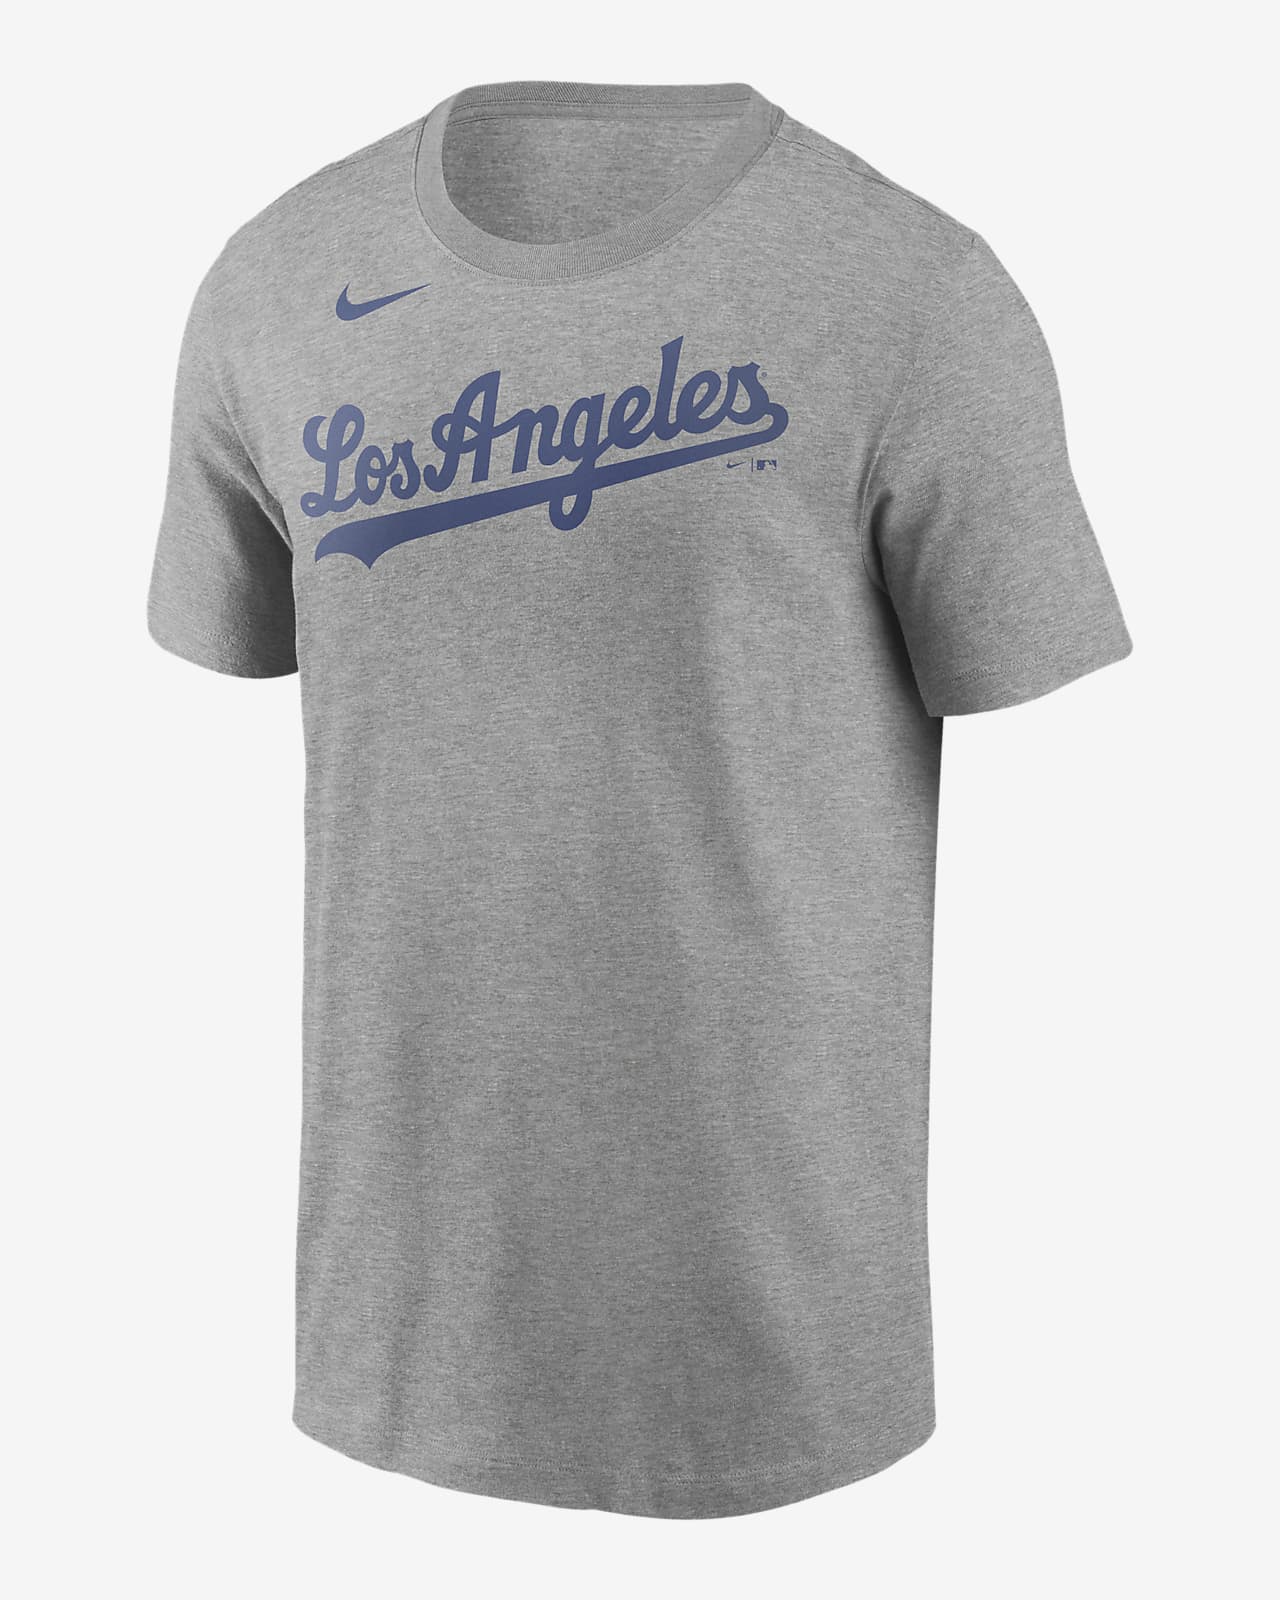 Cody Bellinger Los Angeles Dodgers Nike Name & Number T-Shirt - White